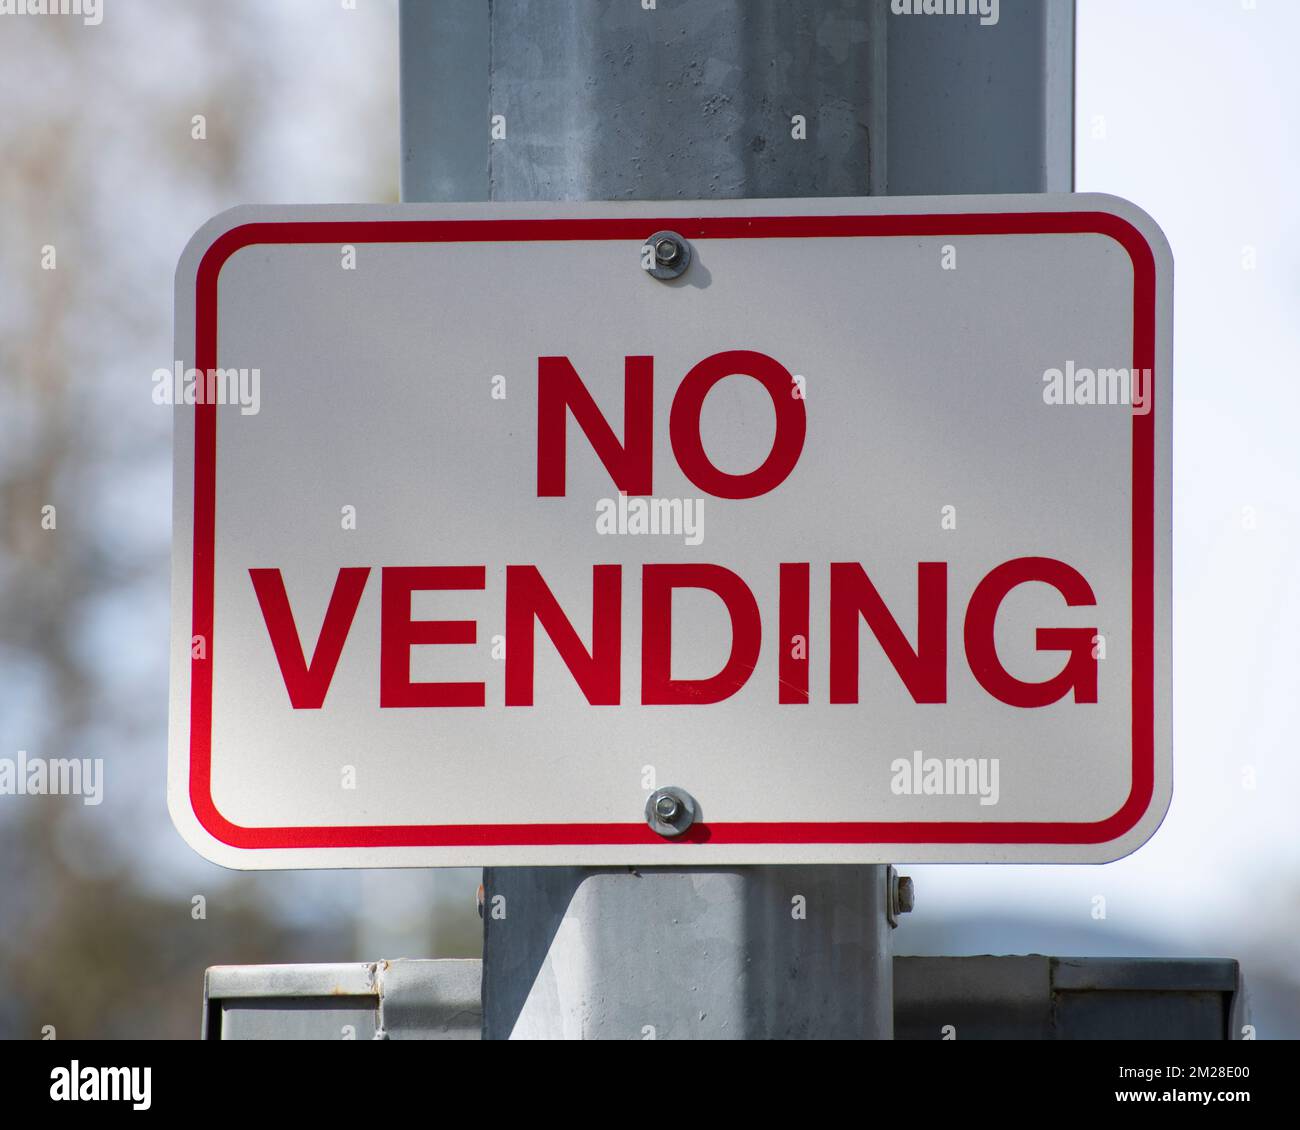 No vending sign at at the highway junction in Hope, British Columbia, Canada Stock Photo